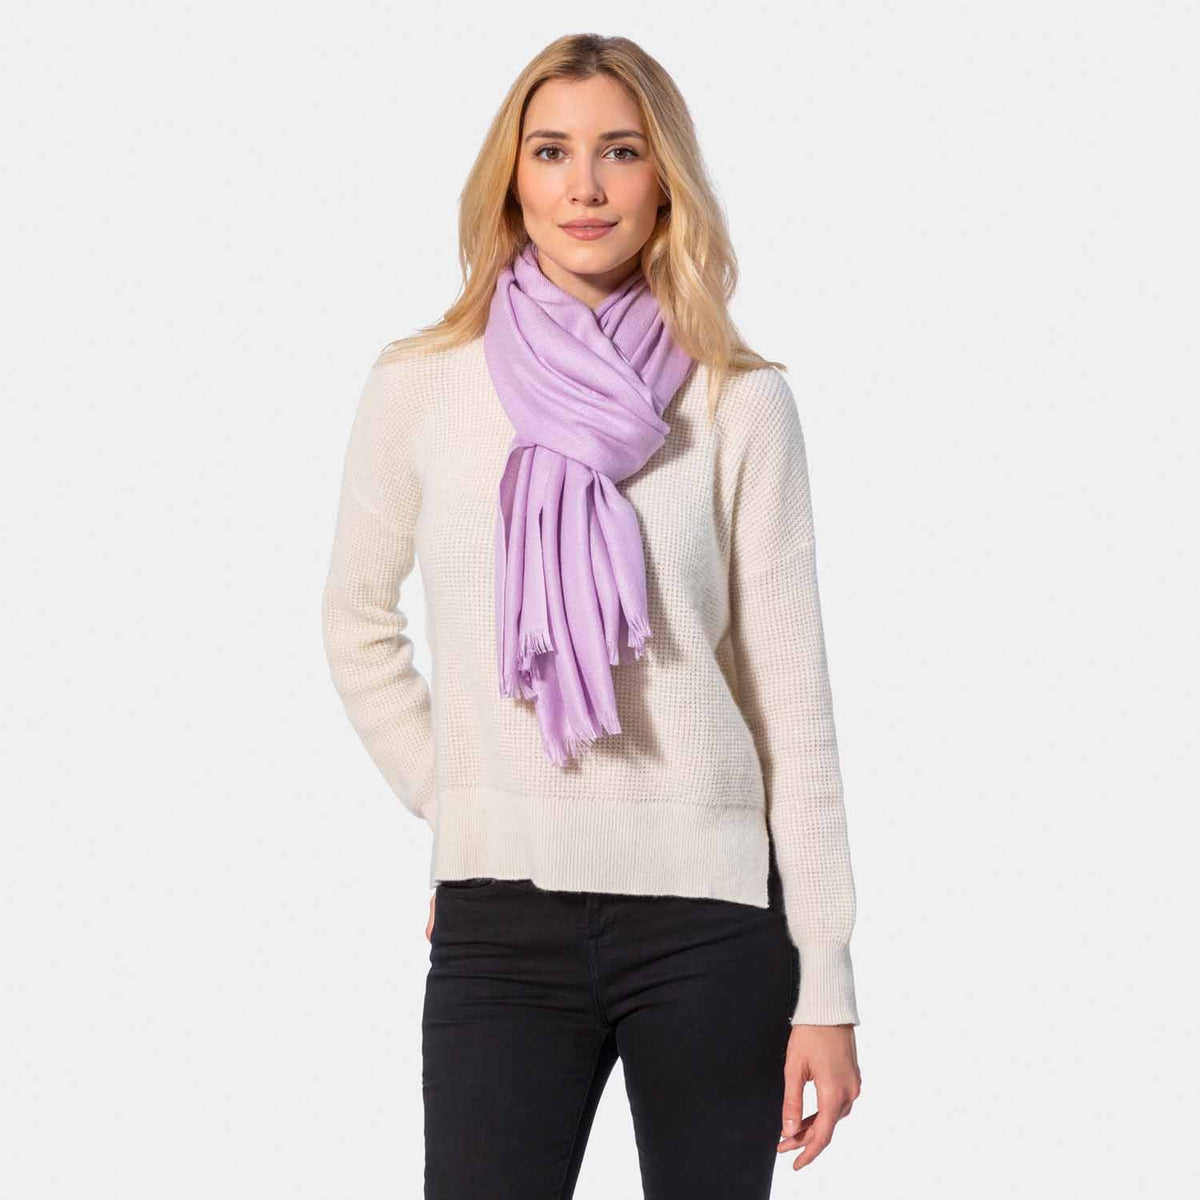 Picture of a woman in a lightweight Cashmere Blend Pashmina Wrap with Eyelash Fringe-Amicale Cashmere, orchid color.